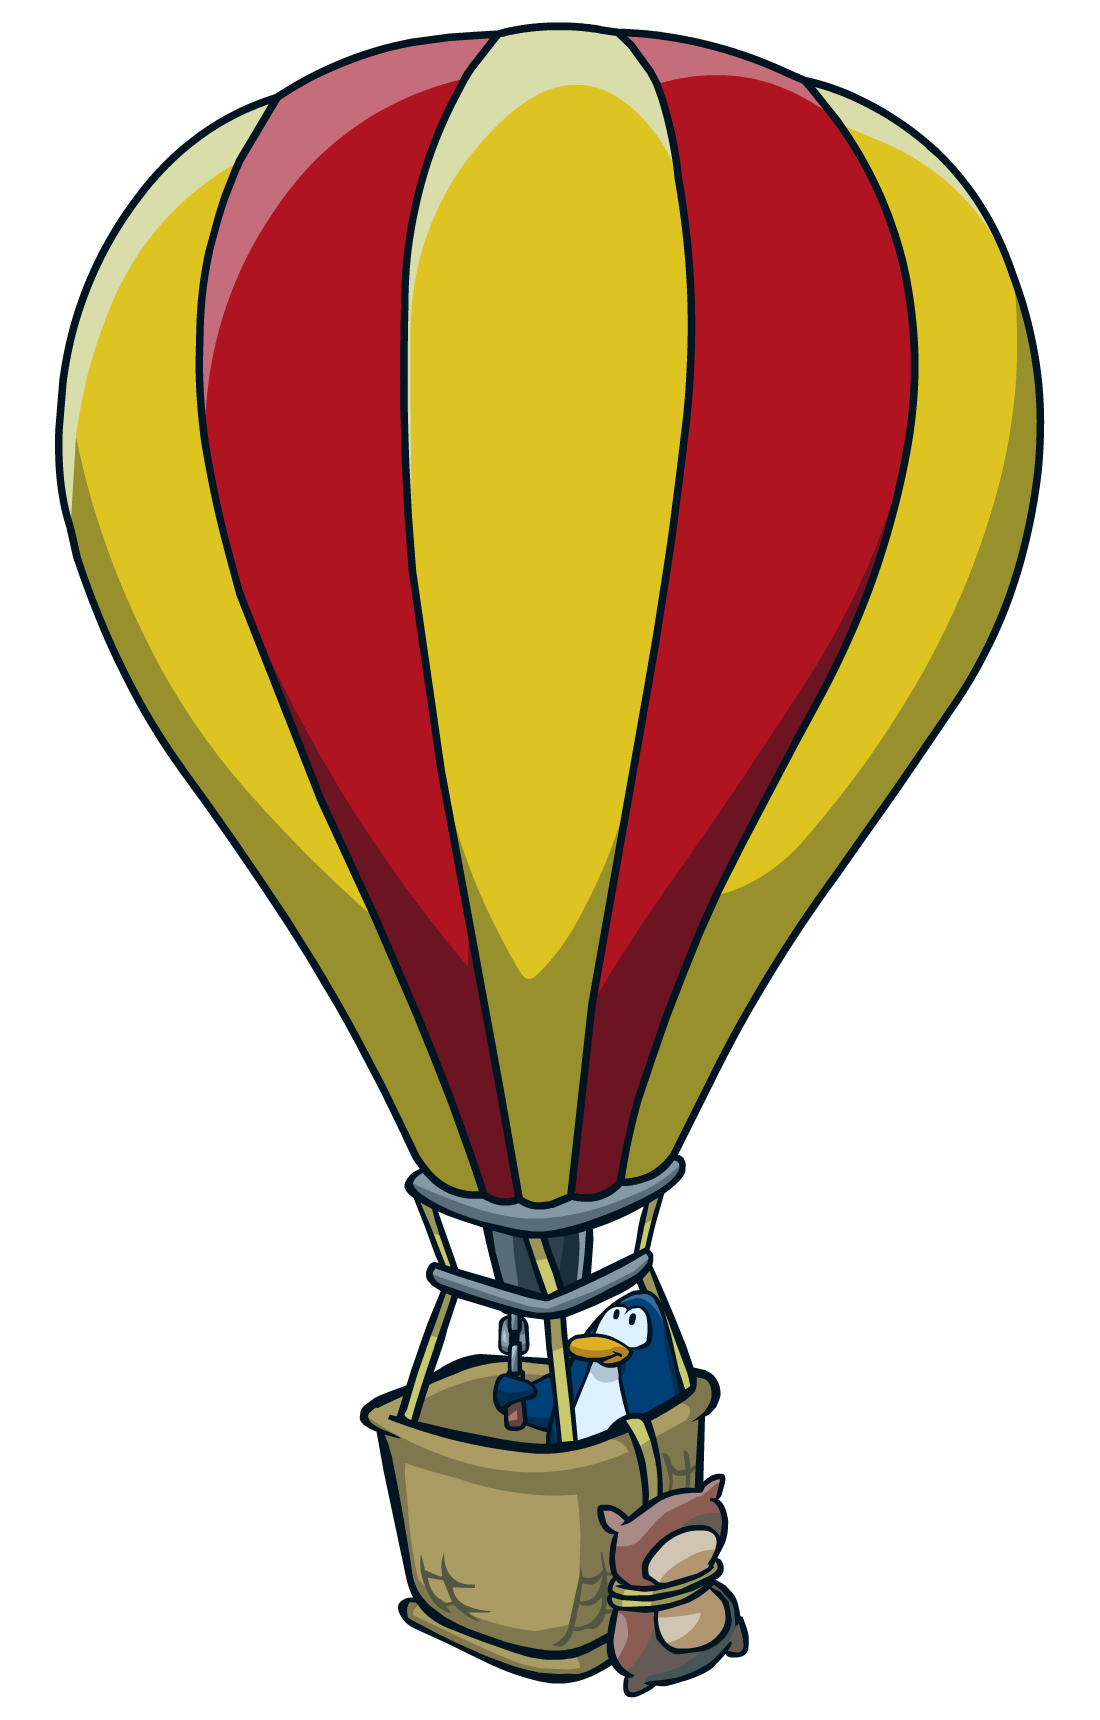 Air Balloon PNG Background Image